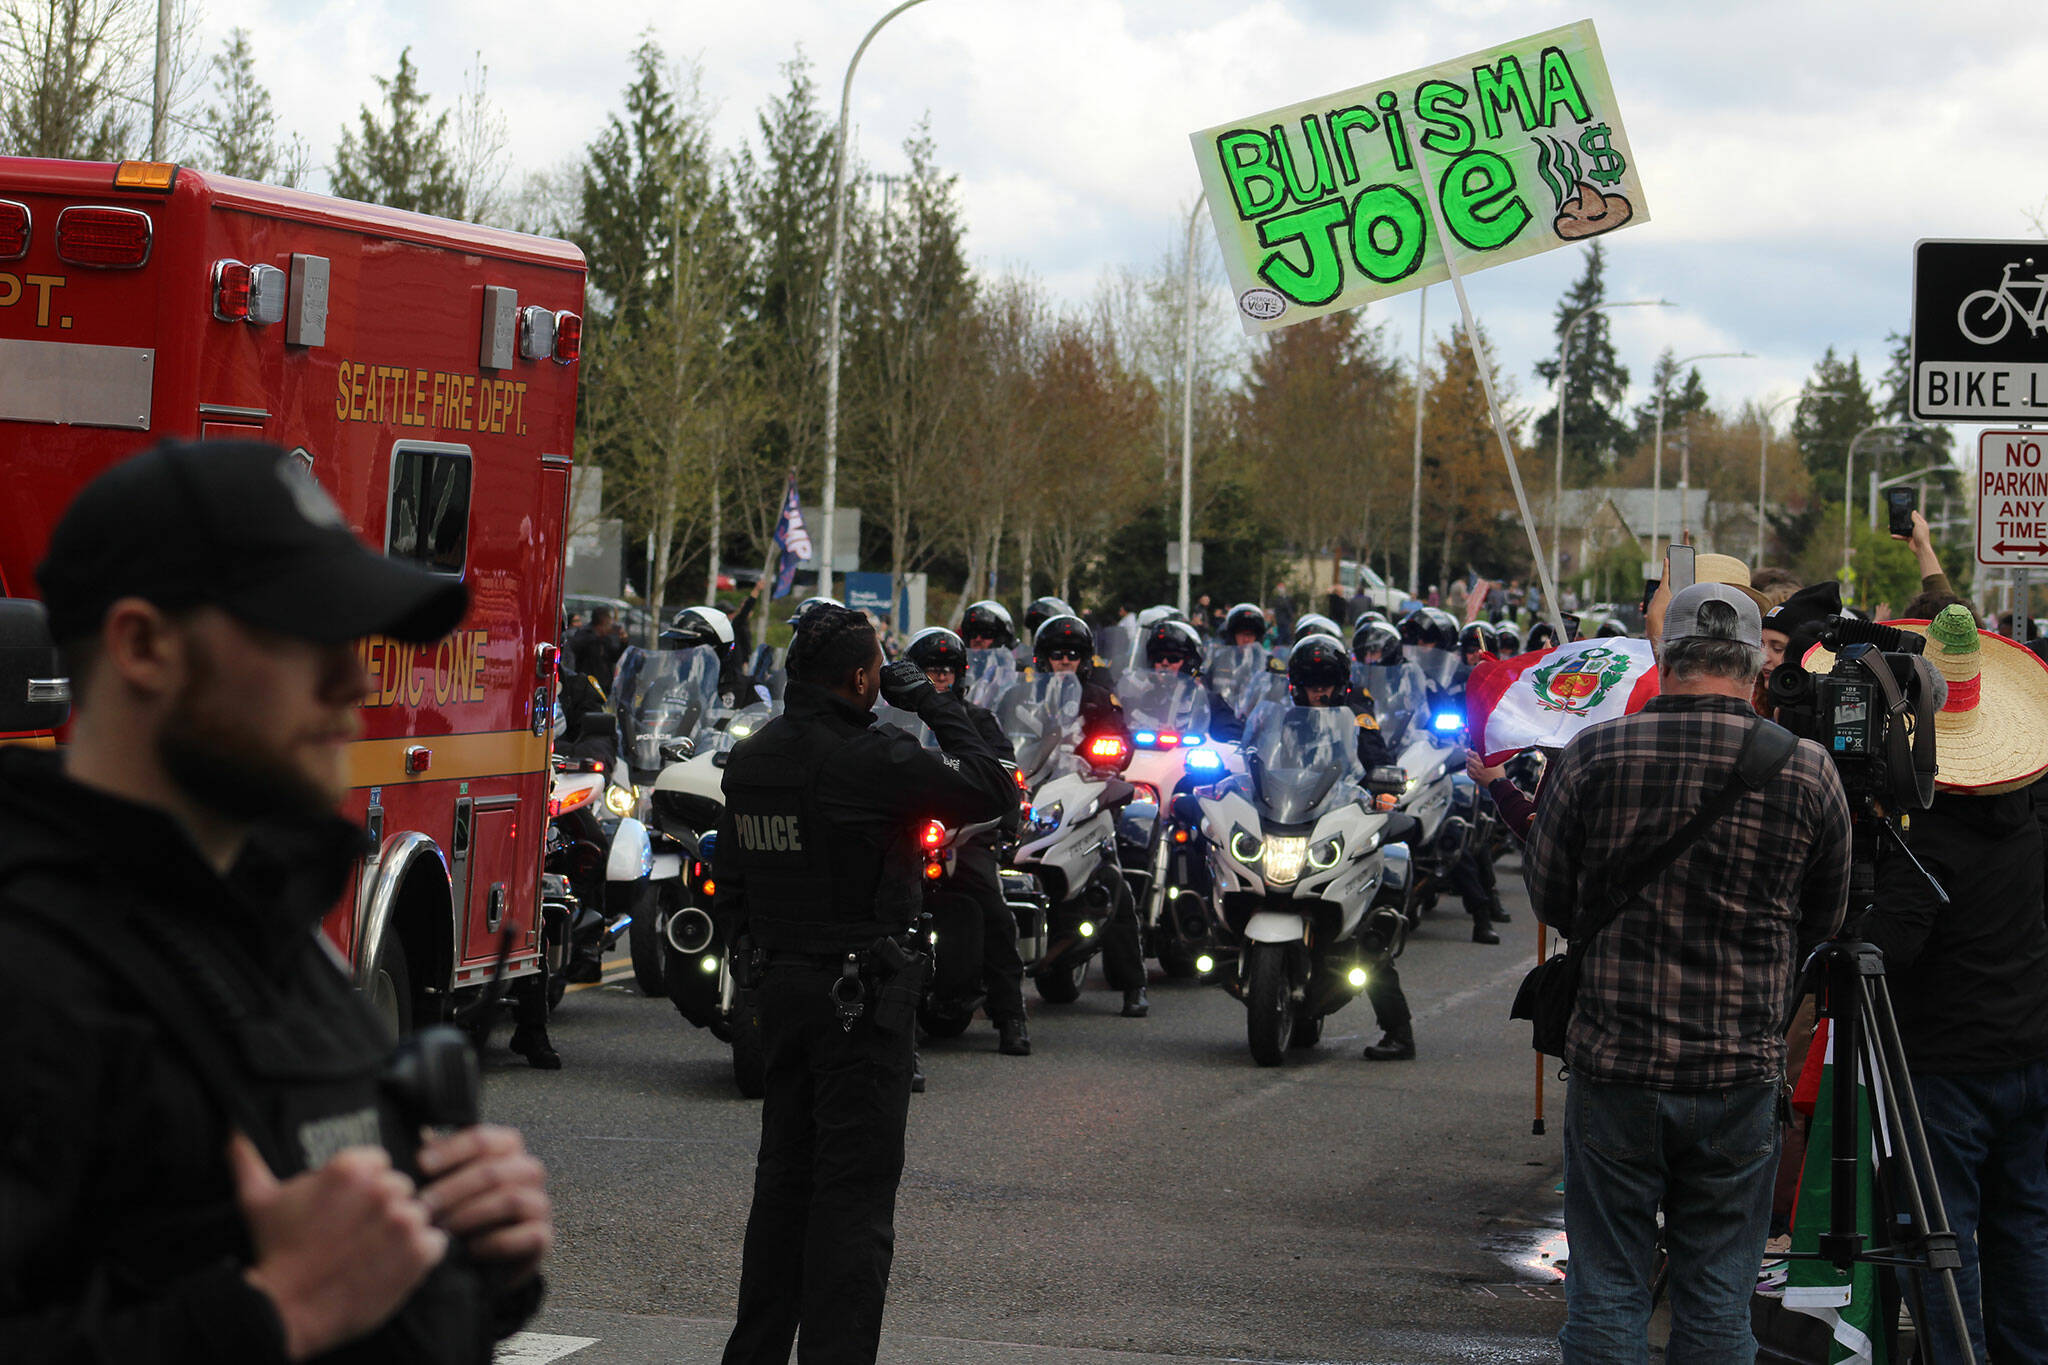 The motorcade bringing the President to the college passes through the intersection of SE 320th Street and 124th Avenue SE in Auburn. Photo by Alex Bruell/Sound Publishing